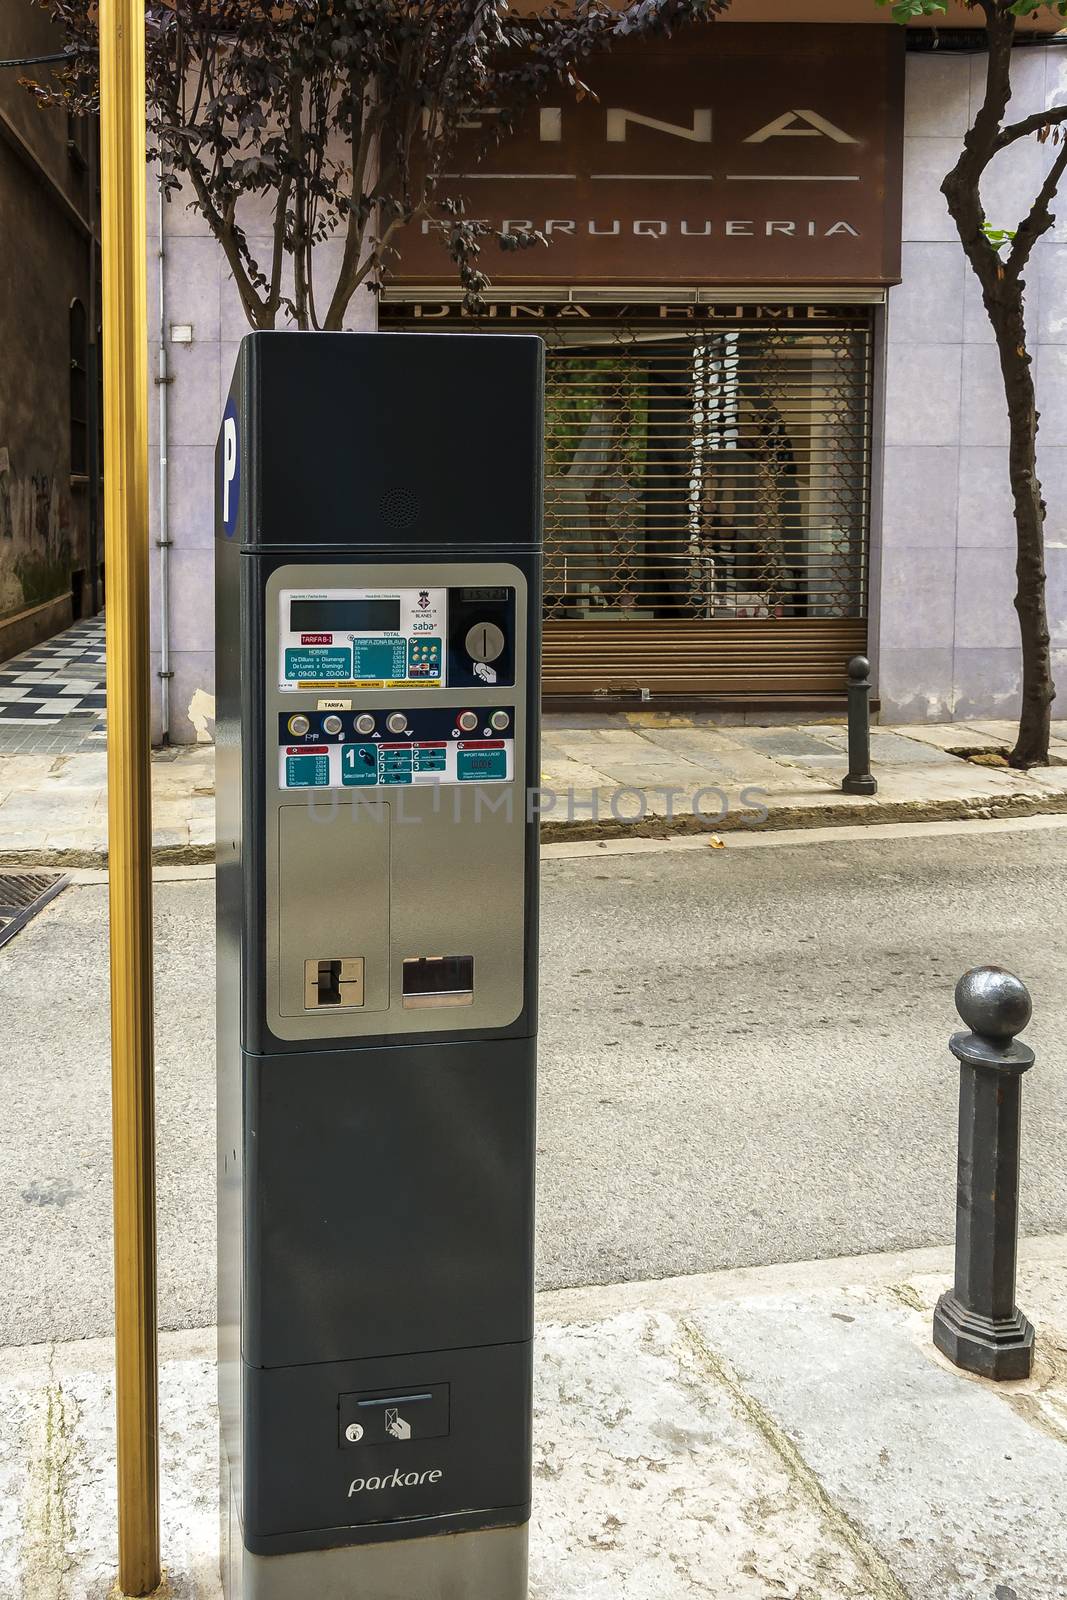 Device for collecting money for parking (Blanes, Spain) by Grommik